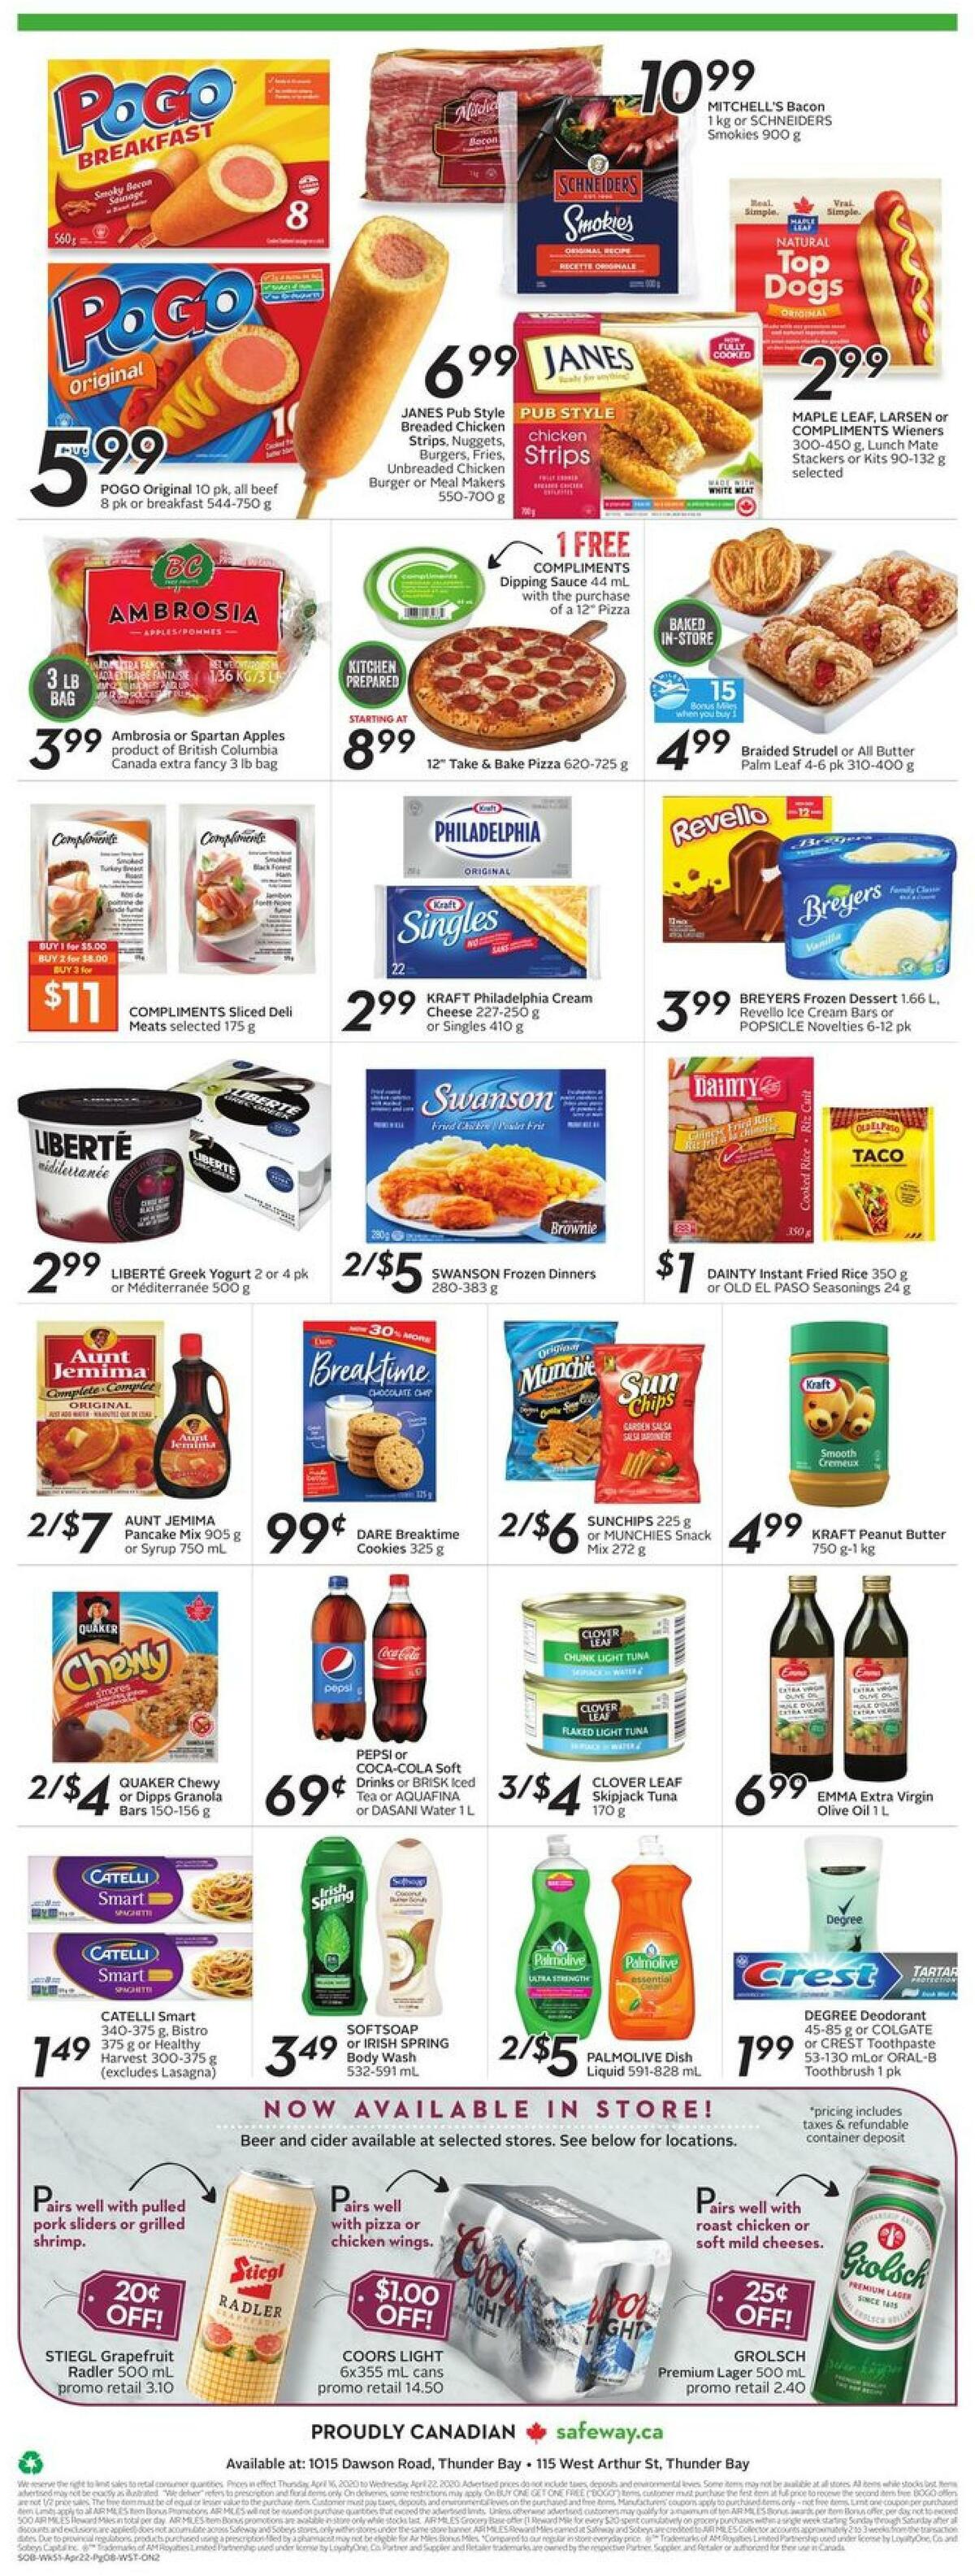 Safeway Flyer from April 16